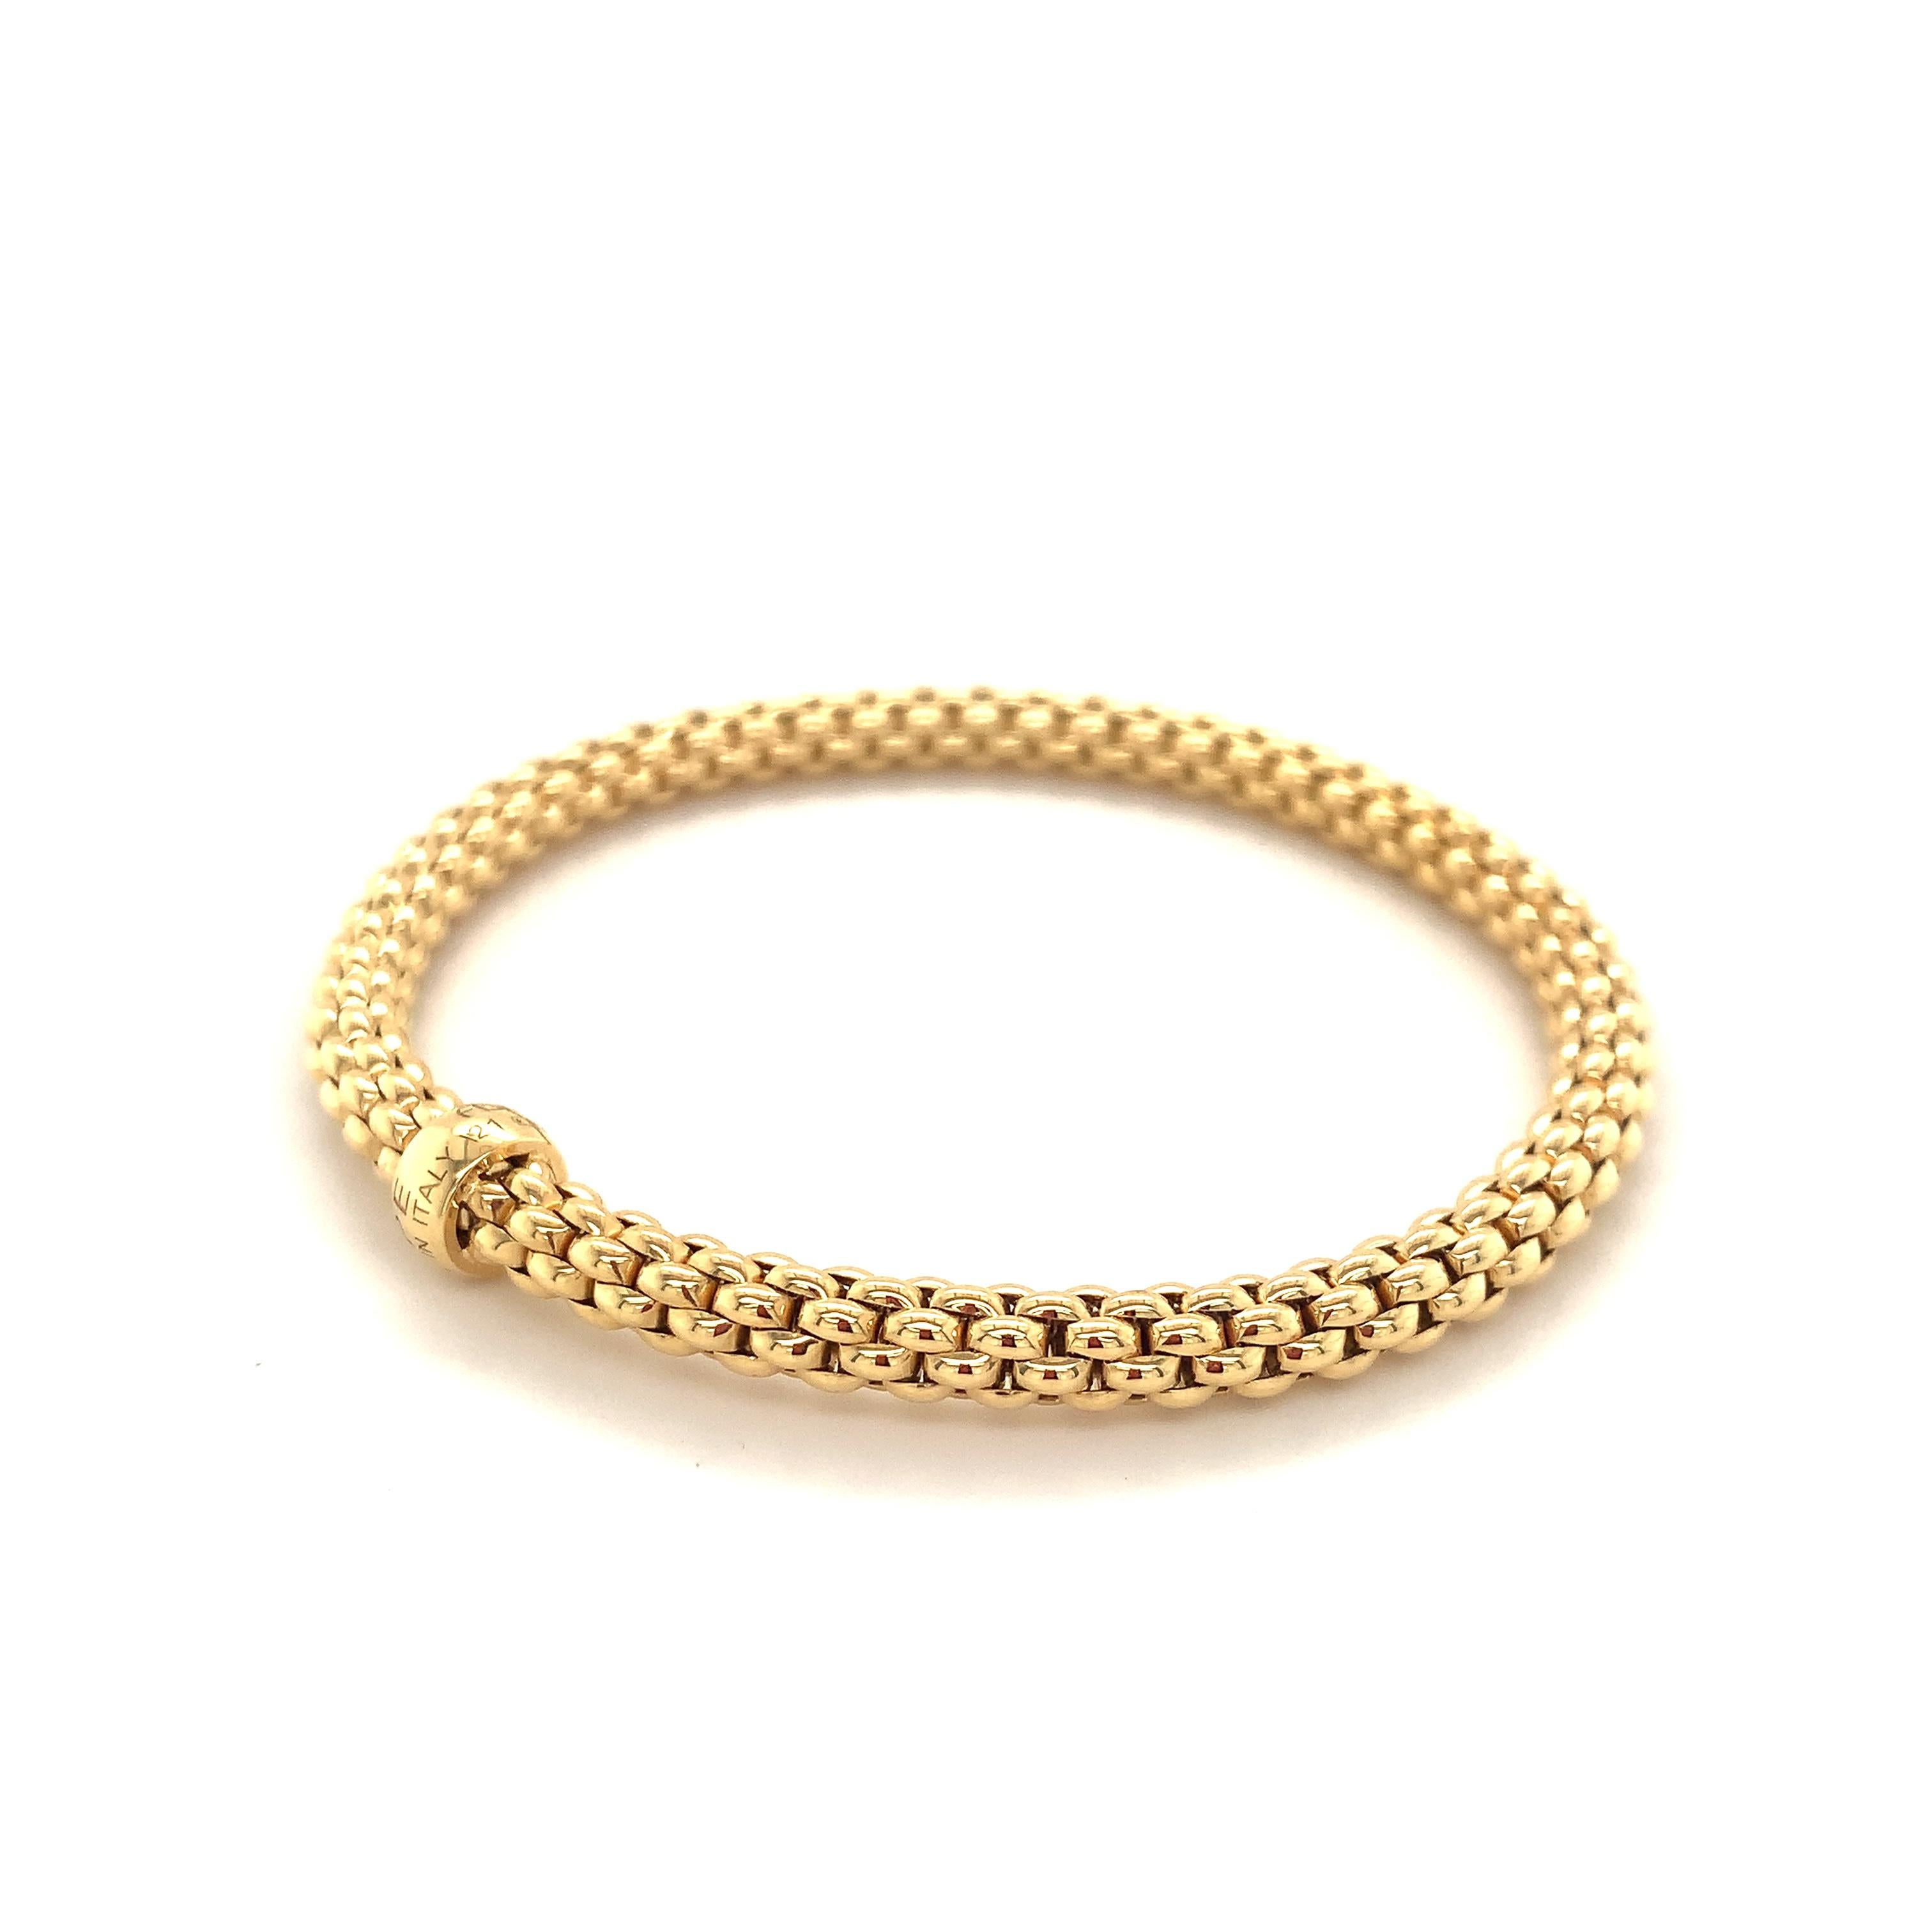 Fope Bracelet 18K Yellow Gold with Solid Gold Rondel 620BM-G 3